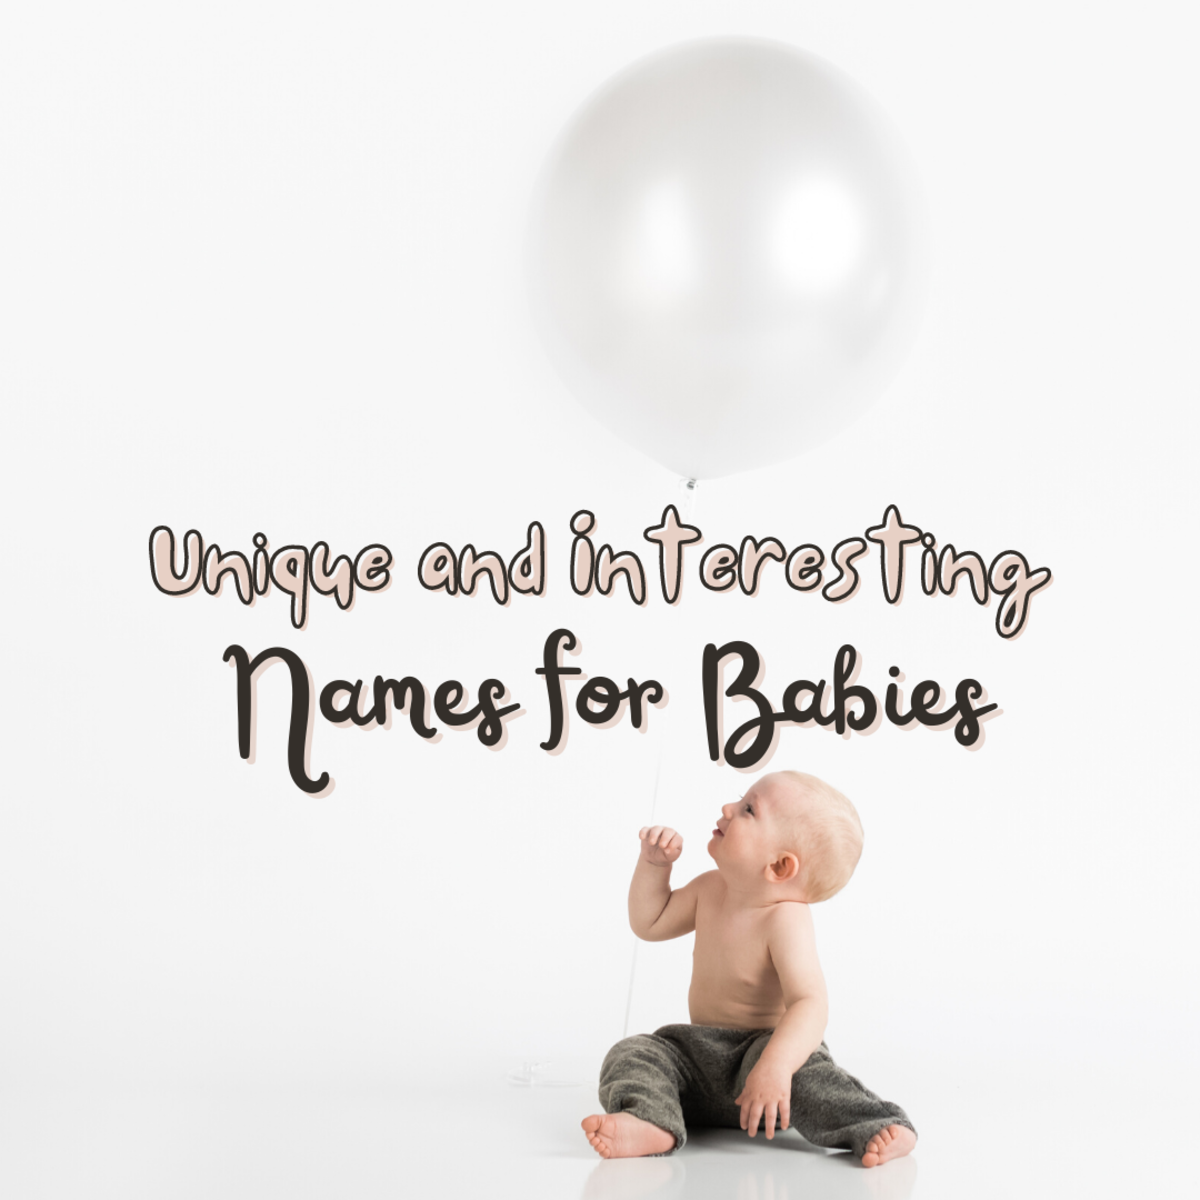 Unique and unusual baby name ideas